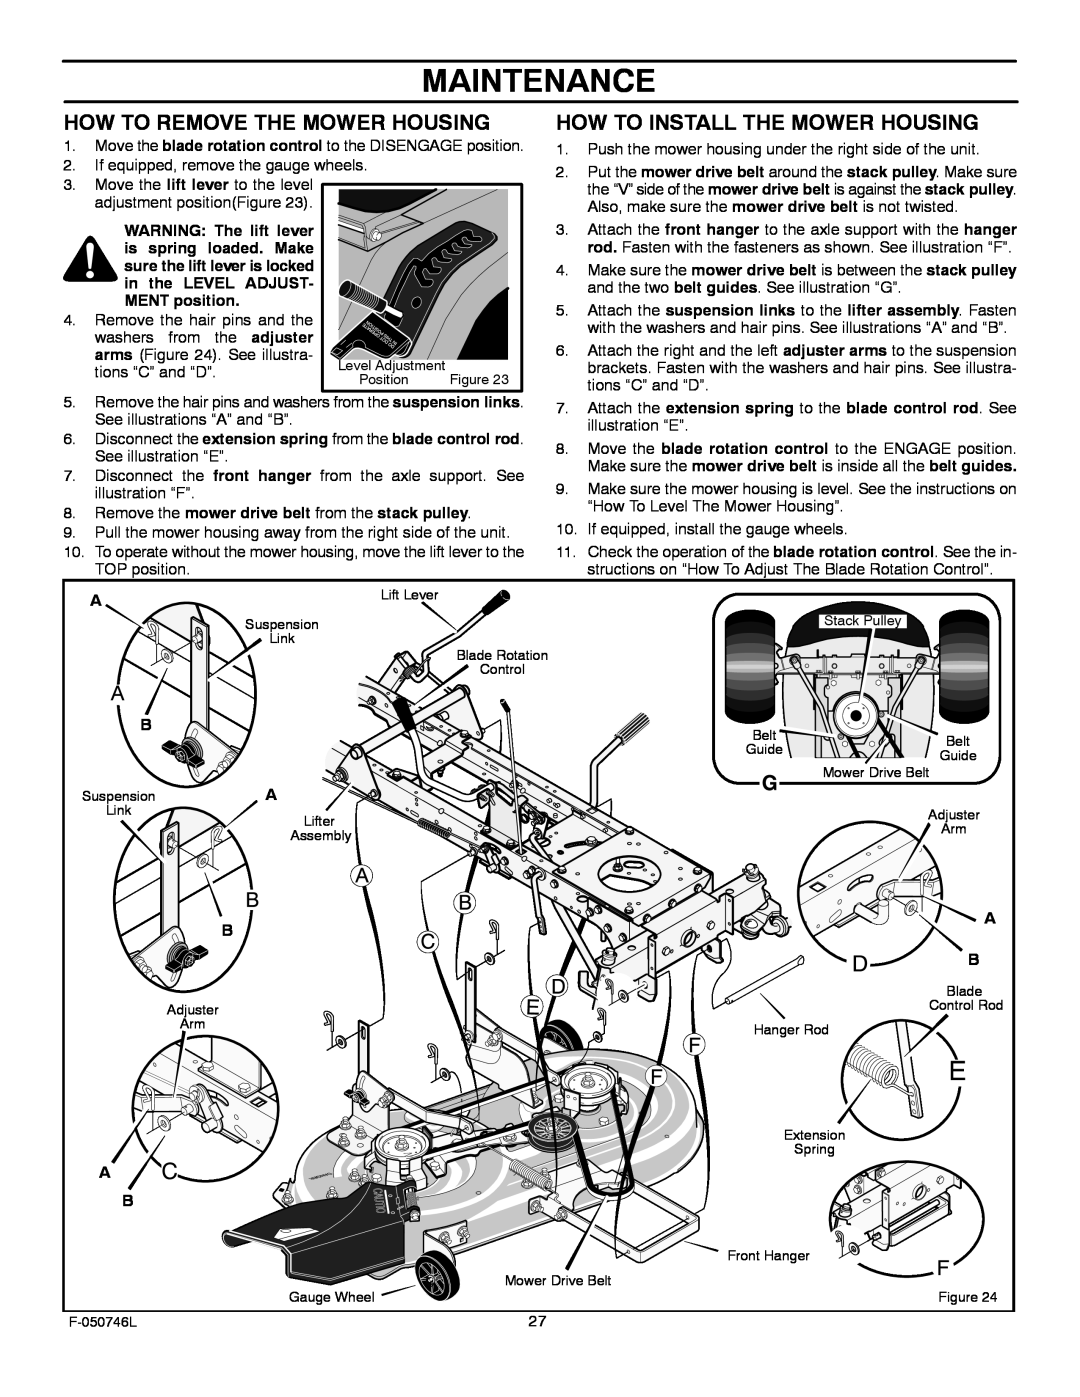 Murray 425016x48A manual Maintenance, How To Remove The Mower Housing, How To Install The Mower Housing 